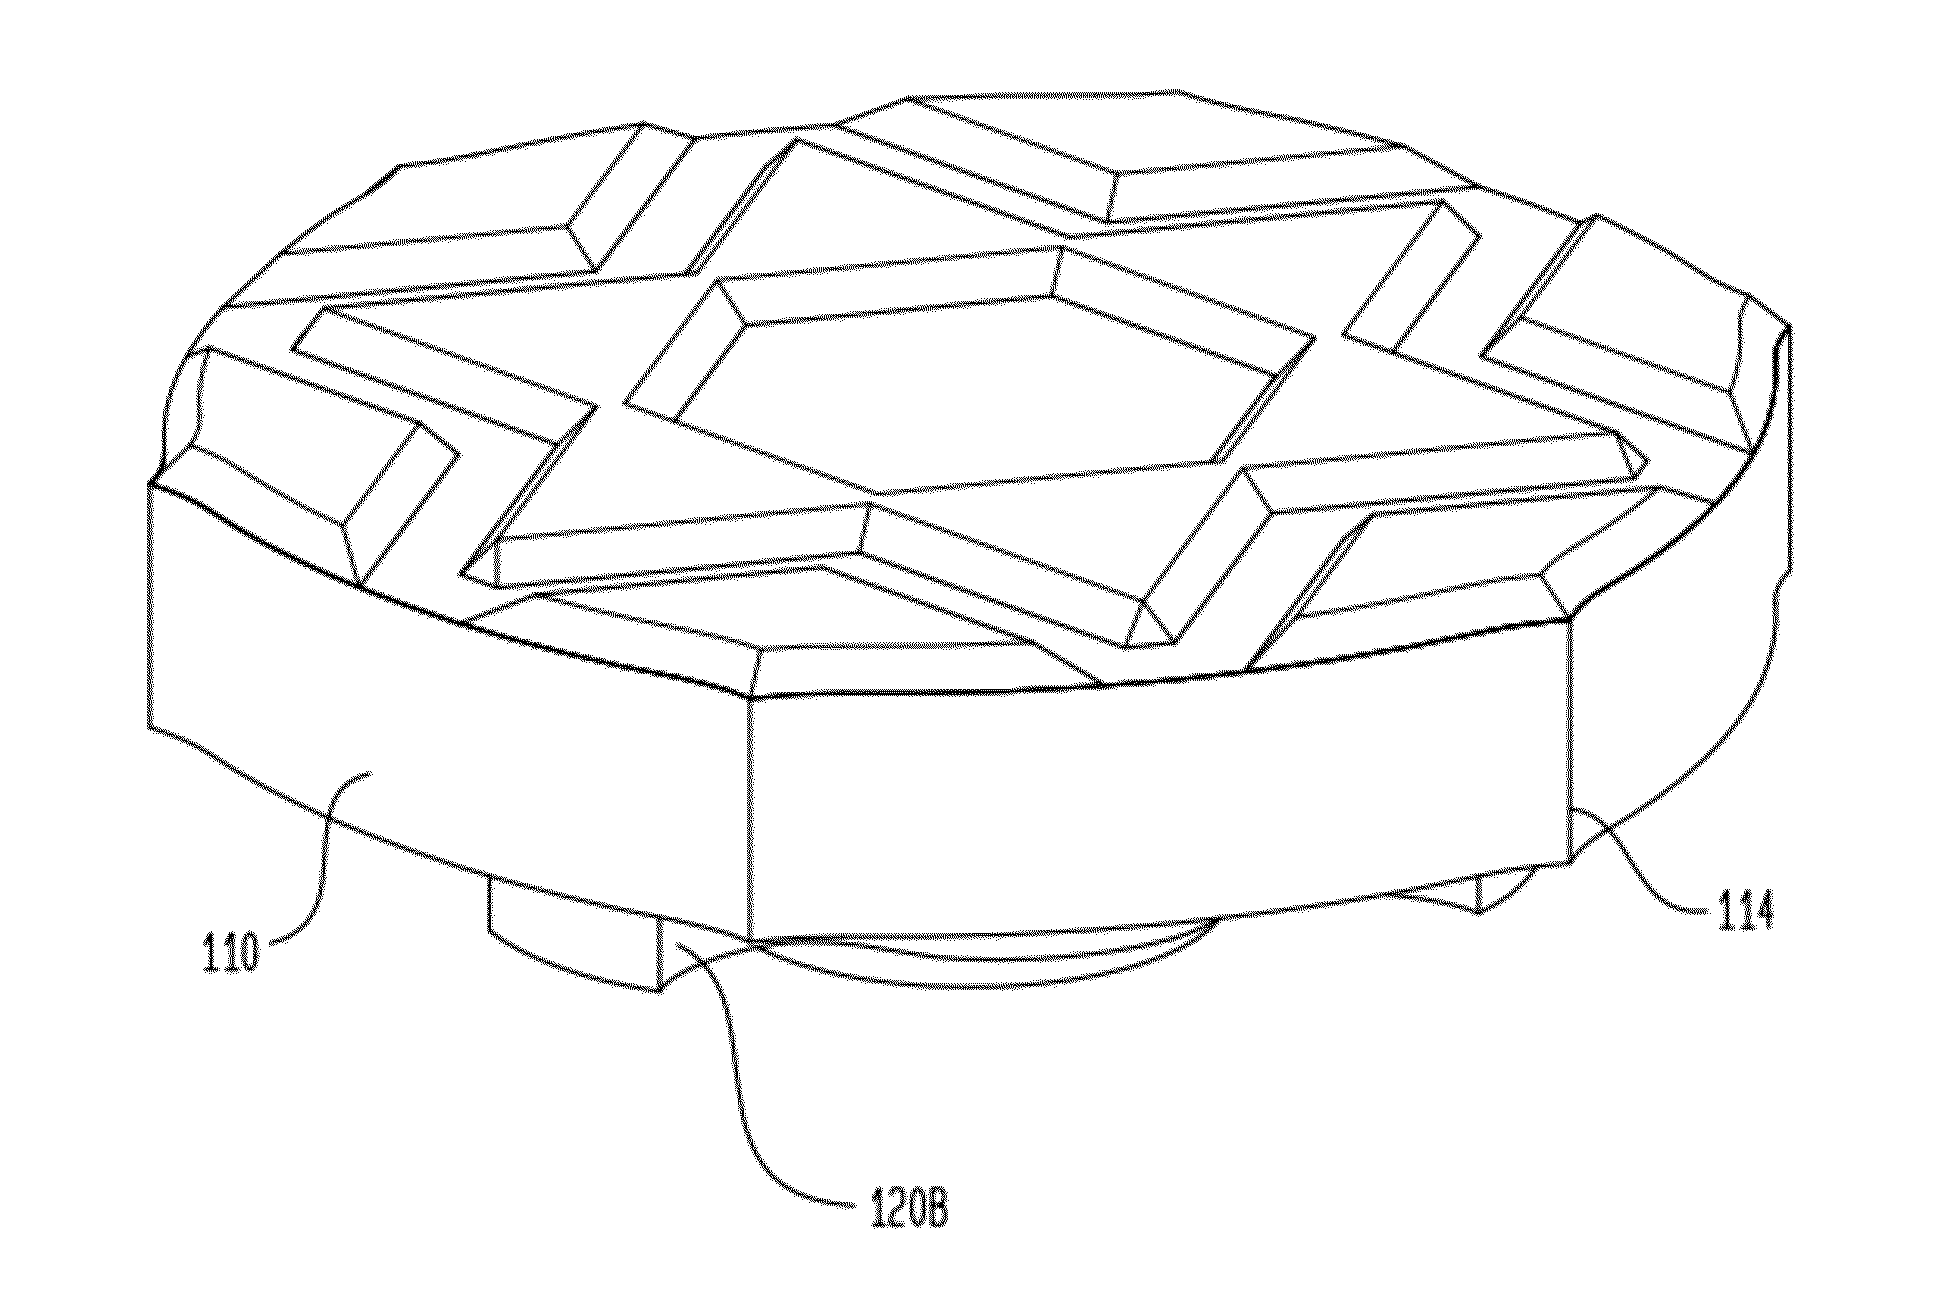 Printable Composition of a Liquid or Gel Suspension of Diodes